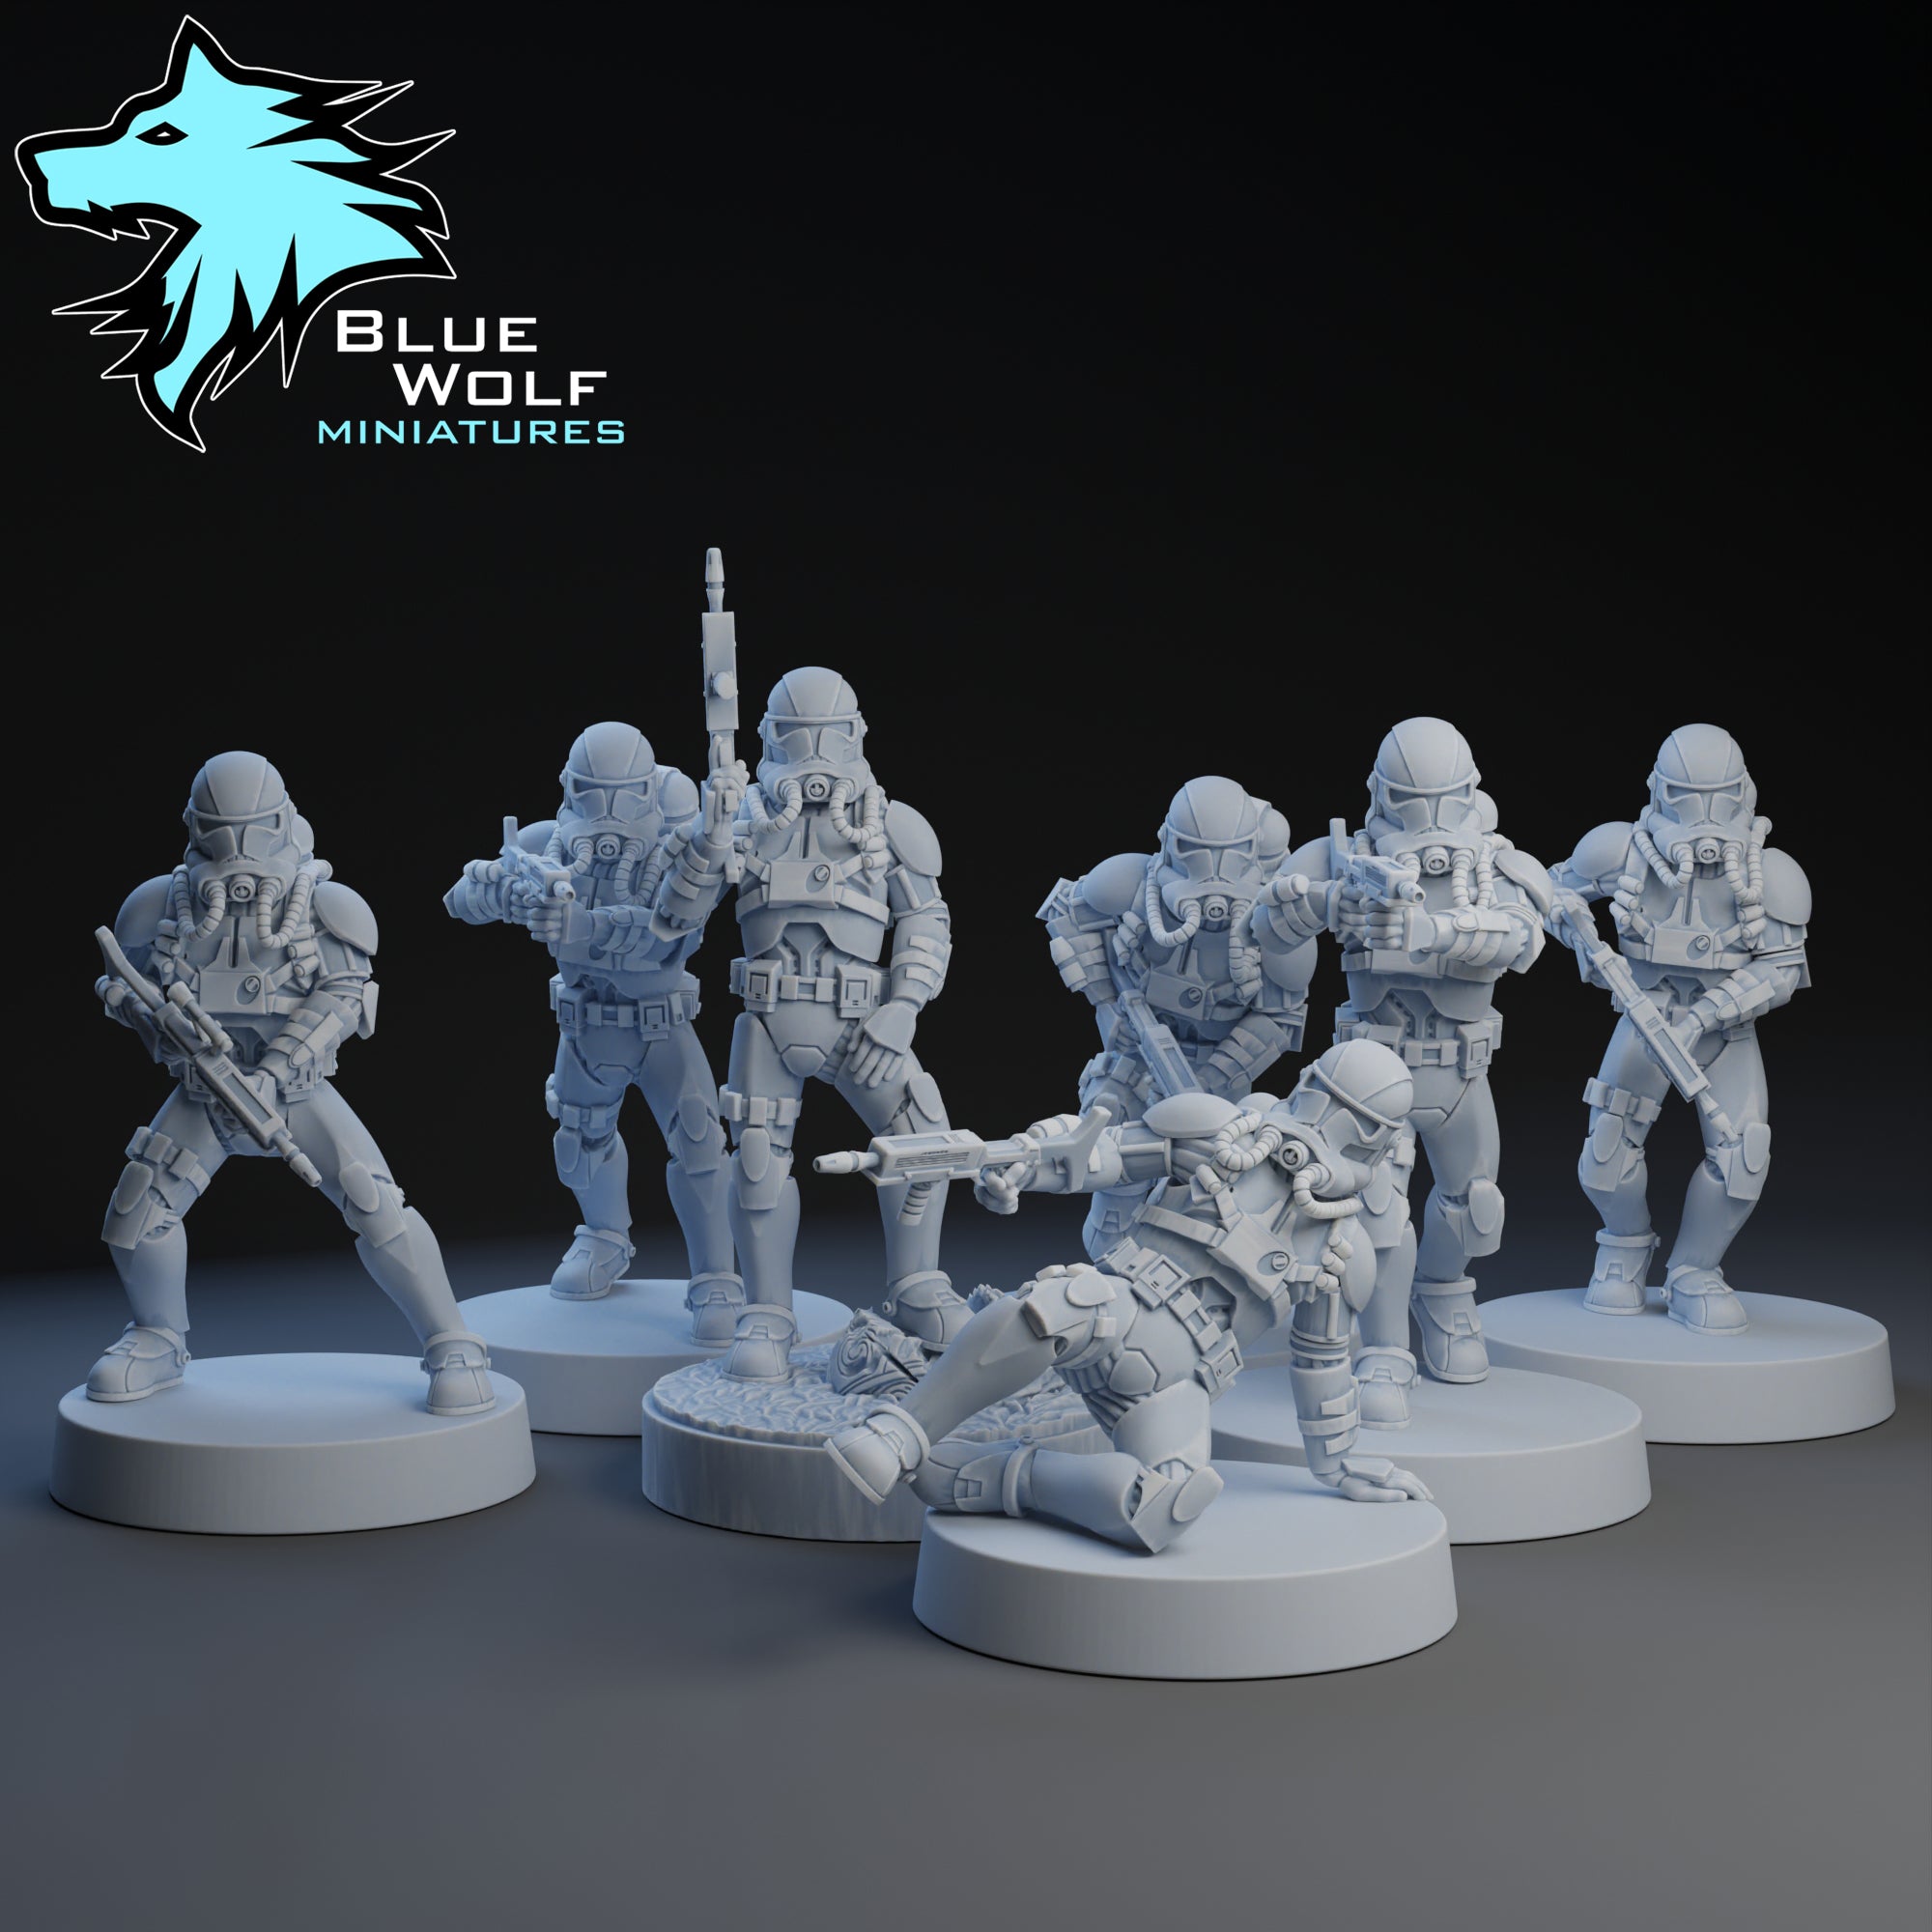 Lagoon Troopers ‧ 7 Varianten ‧ Blue Wolf Miniatures ‧ 1:48 Scale ‧ 35mm